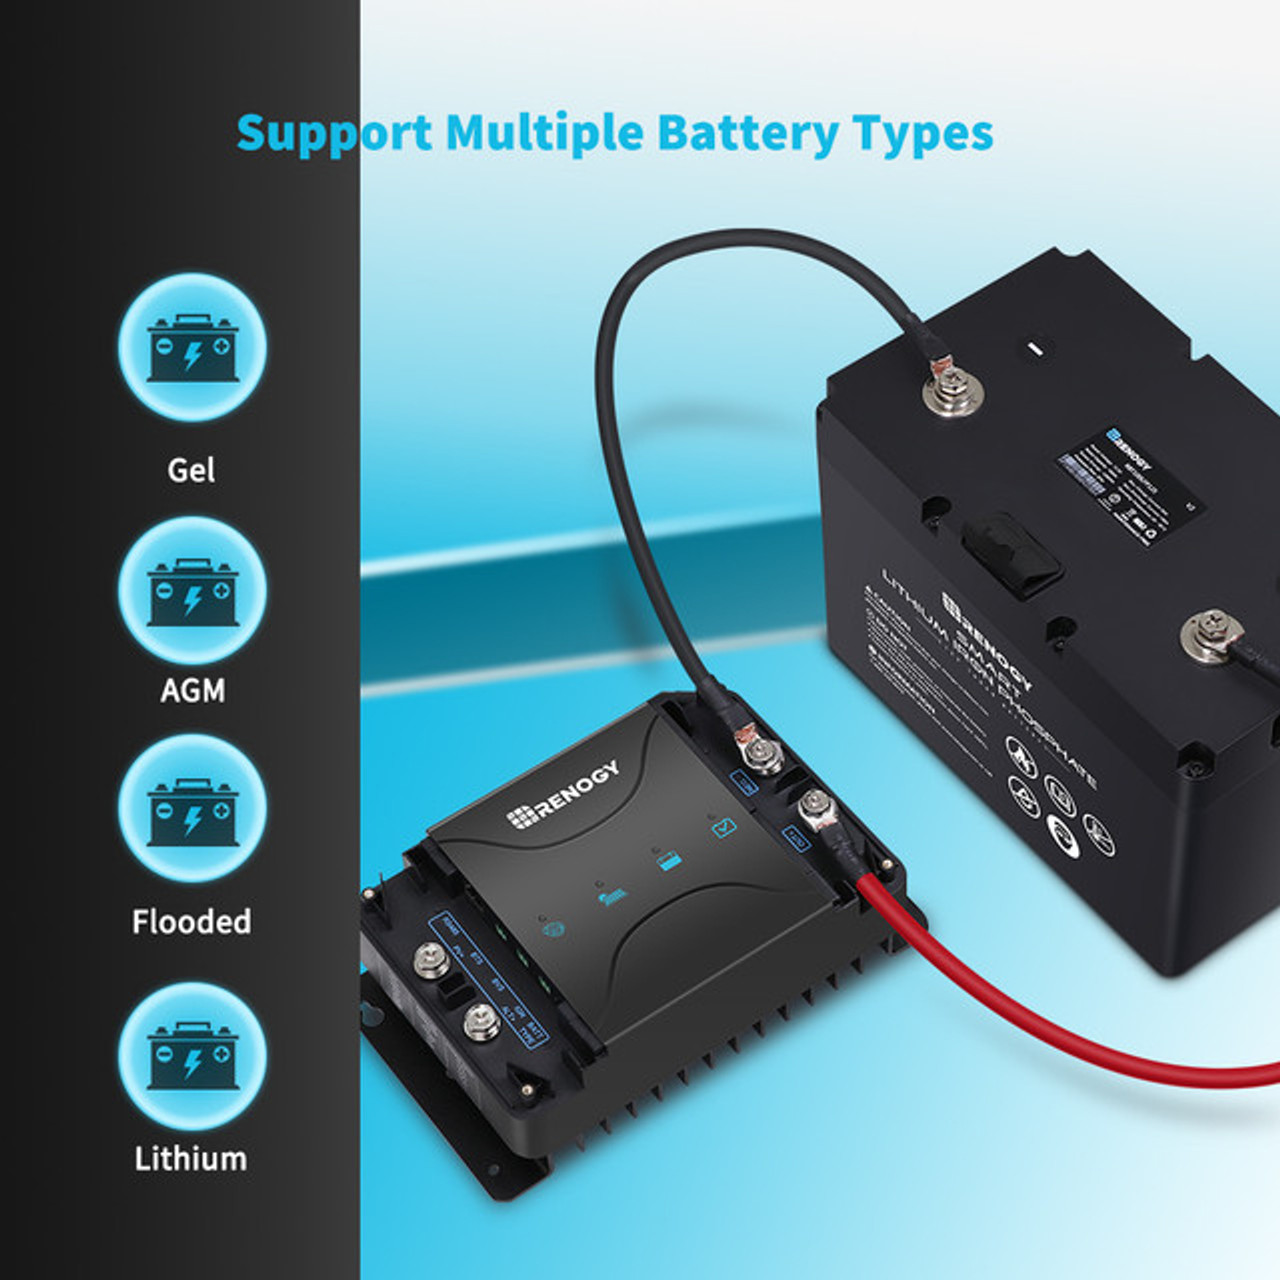 Renogy DCC30S 12V 30A Dual Input DC to DC Battery Charger with MPPT + BT-2 Bluetooth Module